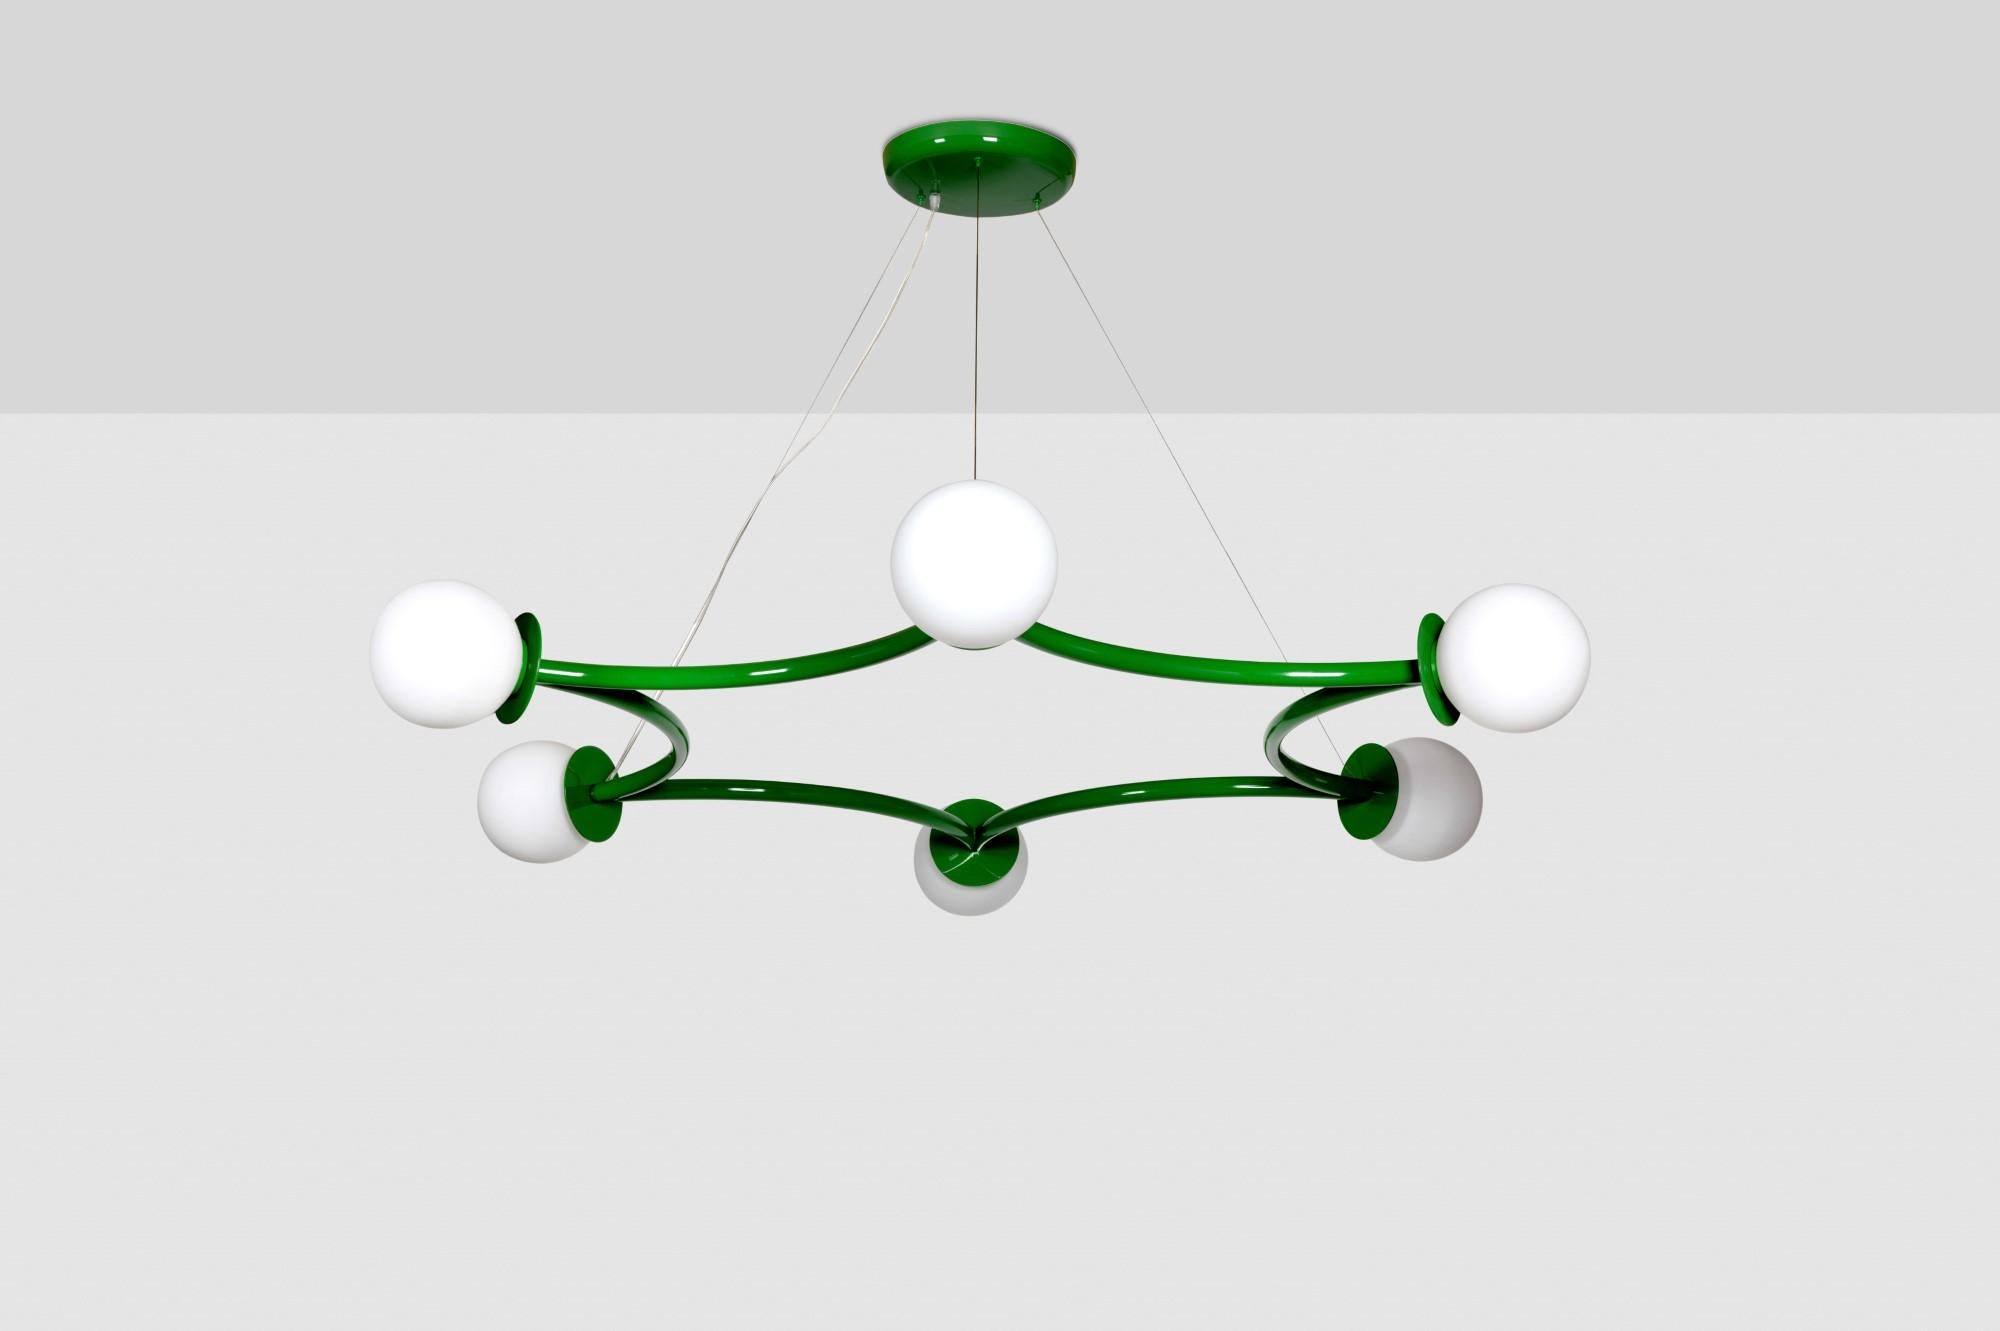 Poppins ceiling lamp by Royal Stranger
Dimensions: W 180 x D 160 x H 20 cm
Materials: Fern green lacquered with glossy finish. Blown glass opal diffuser.

Poppins Ceiling Lamp is a striking constellation describing six concentric light